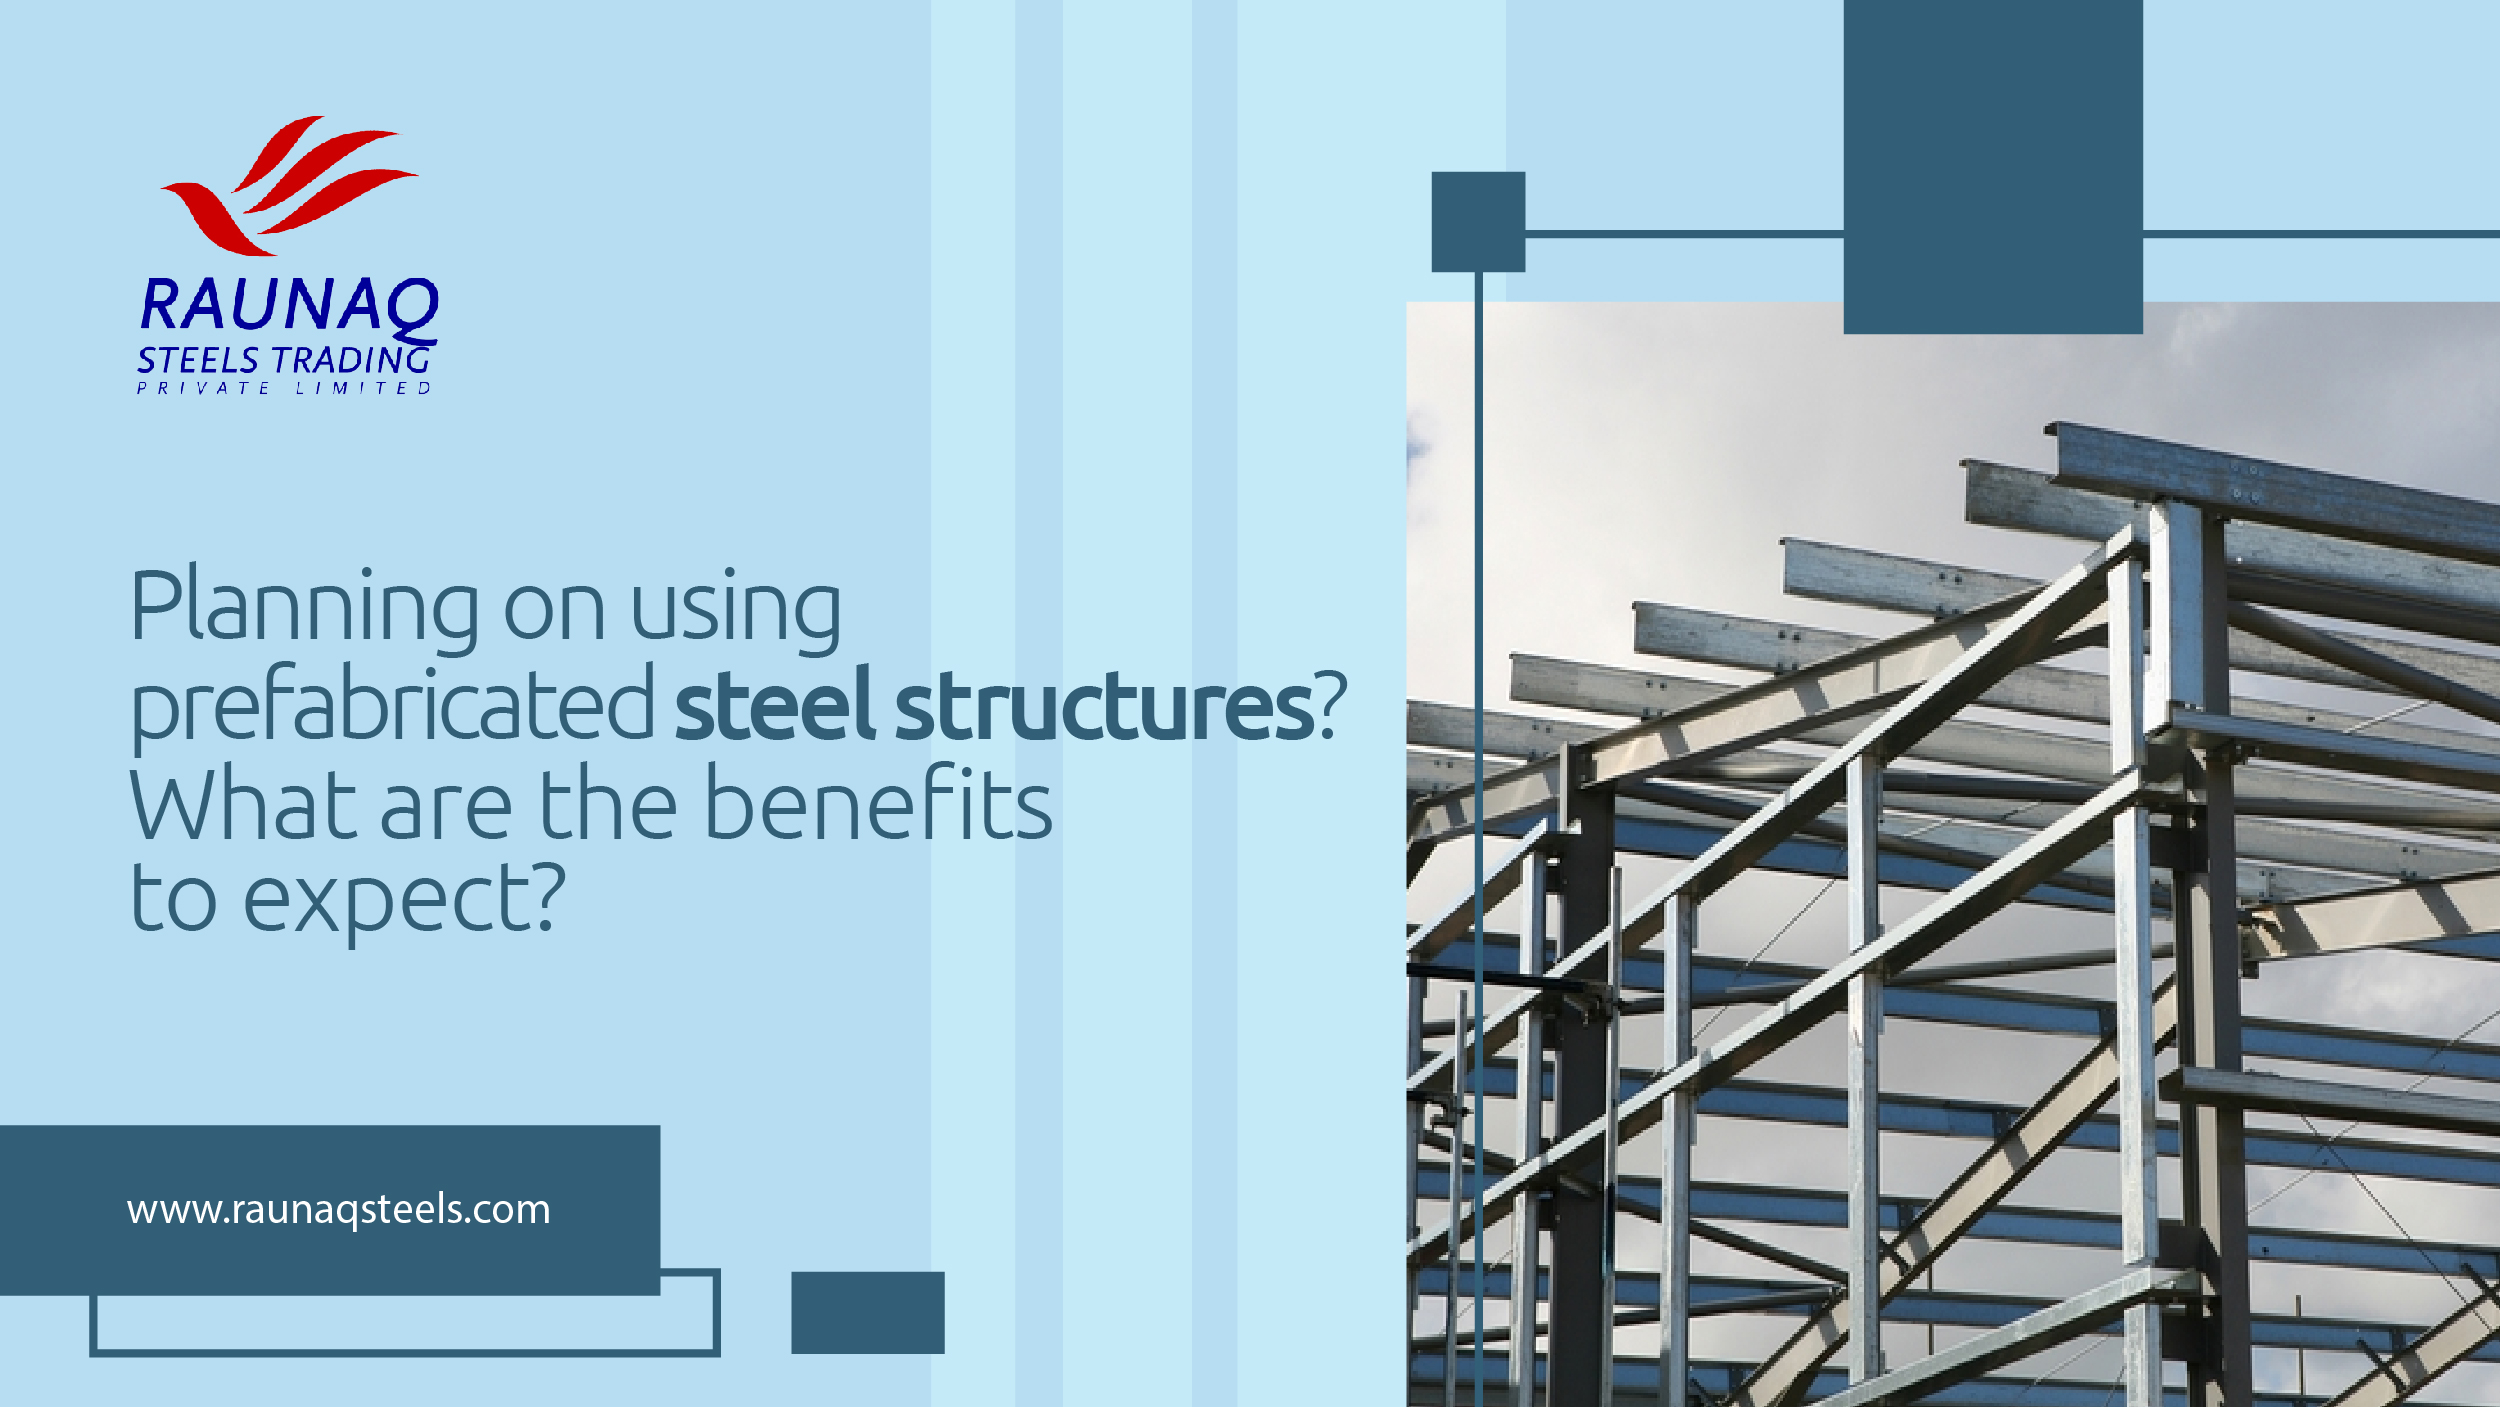 Planning on using prefabricated steel structures? What are the benefits to expect?